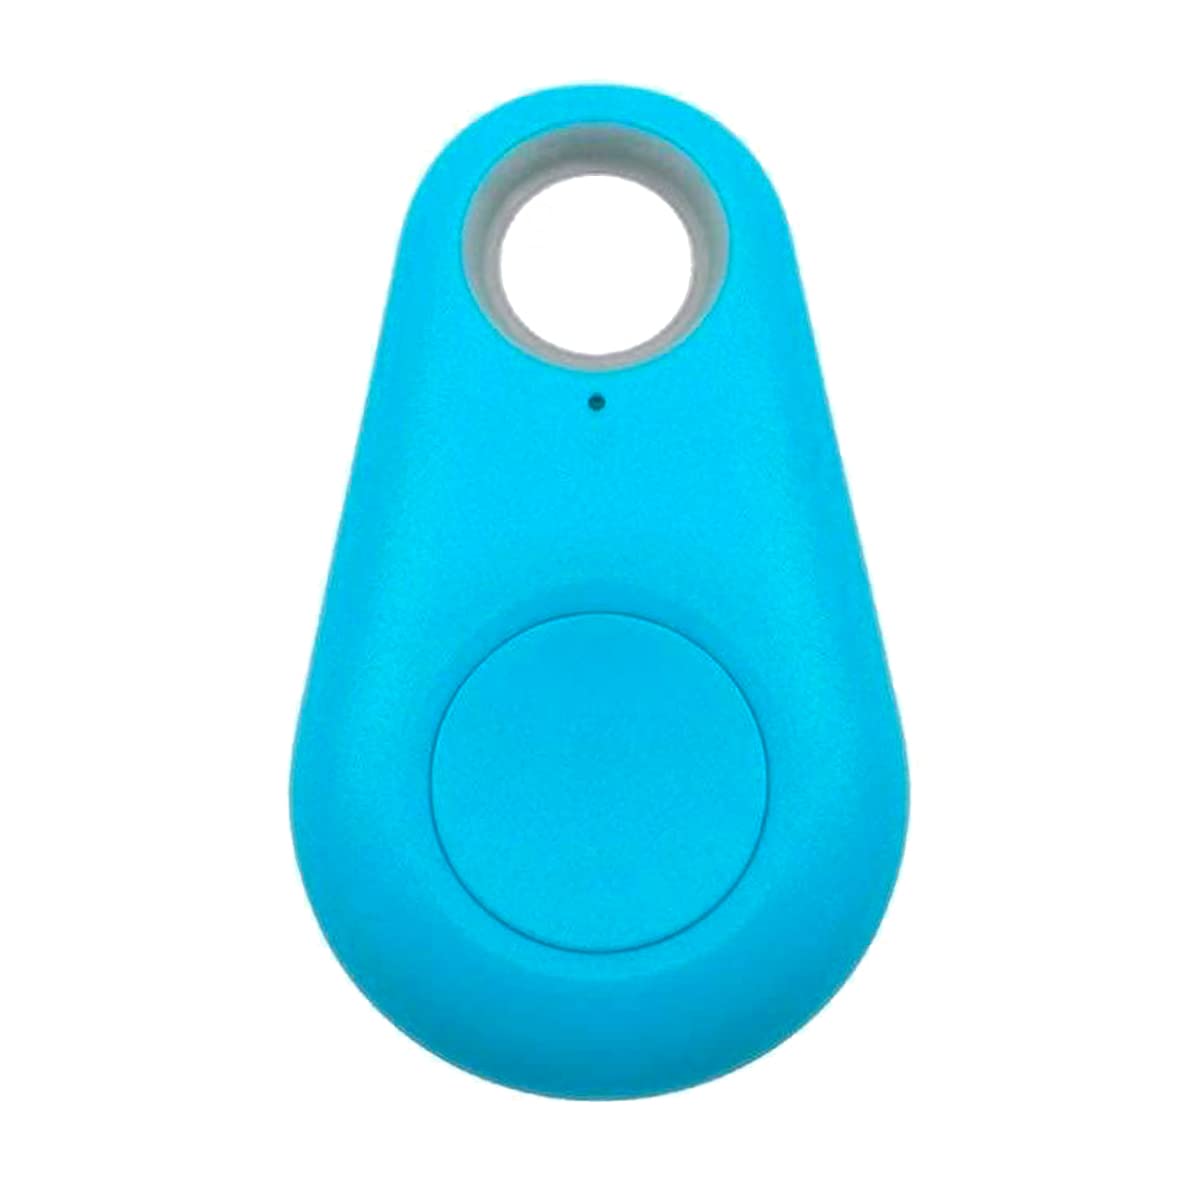 Portable GPS Tracking Mobile Smart Anti Loss Device Key Finder Locator GPS Smart Tracker Device for Kids Dog Pet Cat Wallet Keychain Luggage, Alarm Reminder, App Control